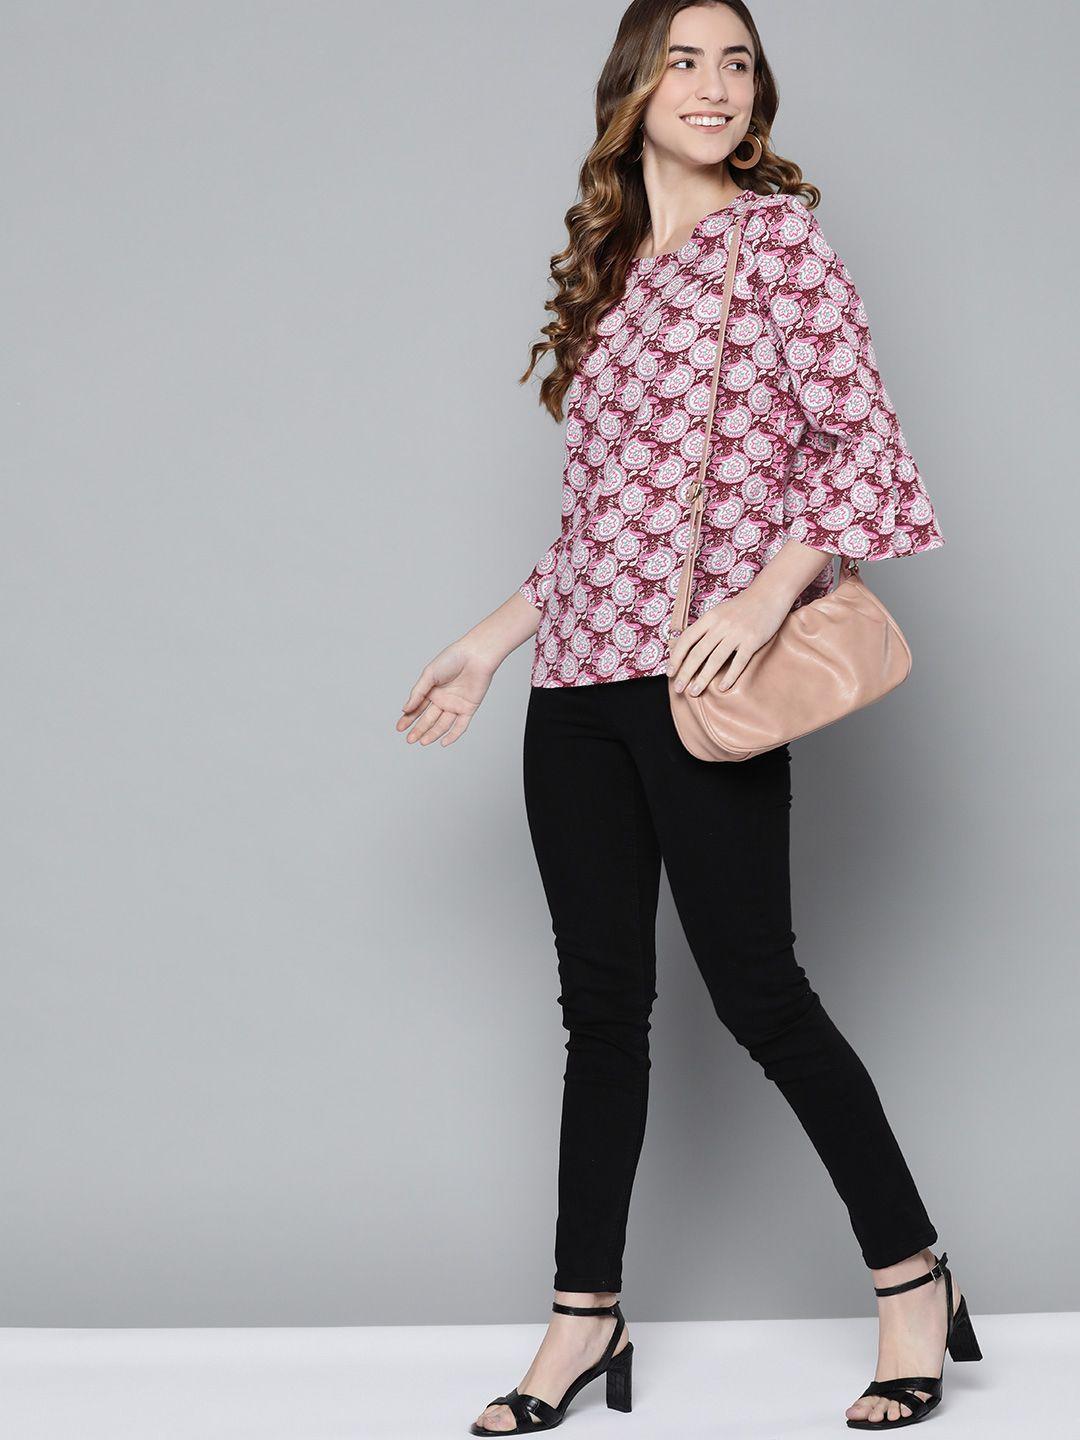 here&now-women-pink-&-white-print-round-neck-empire-top